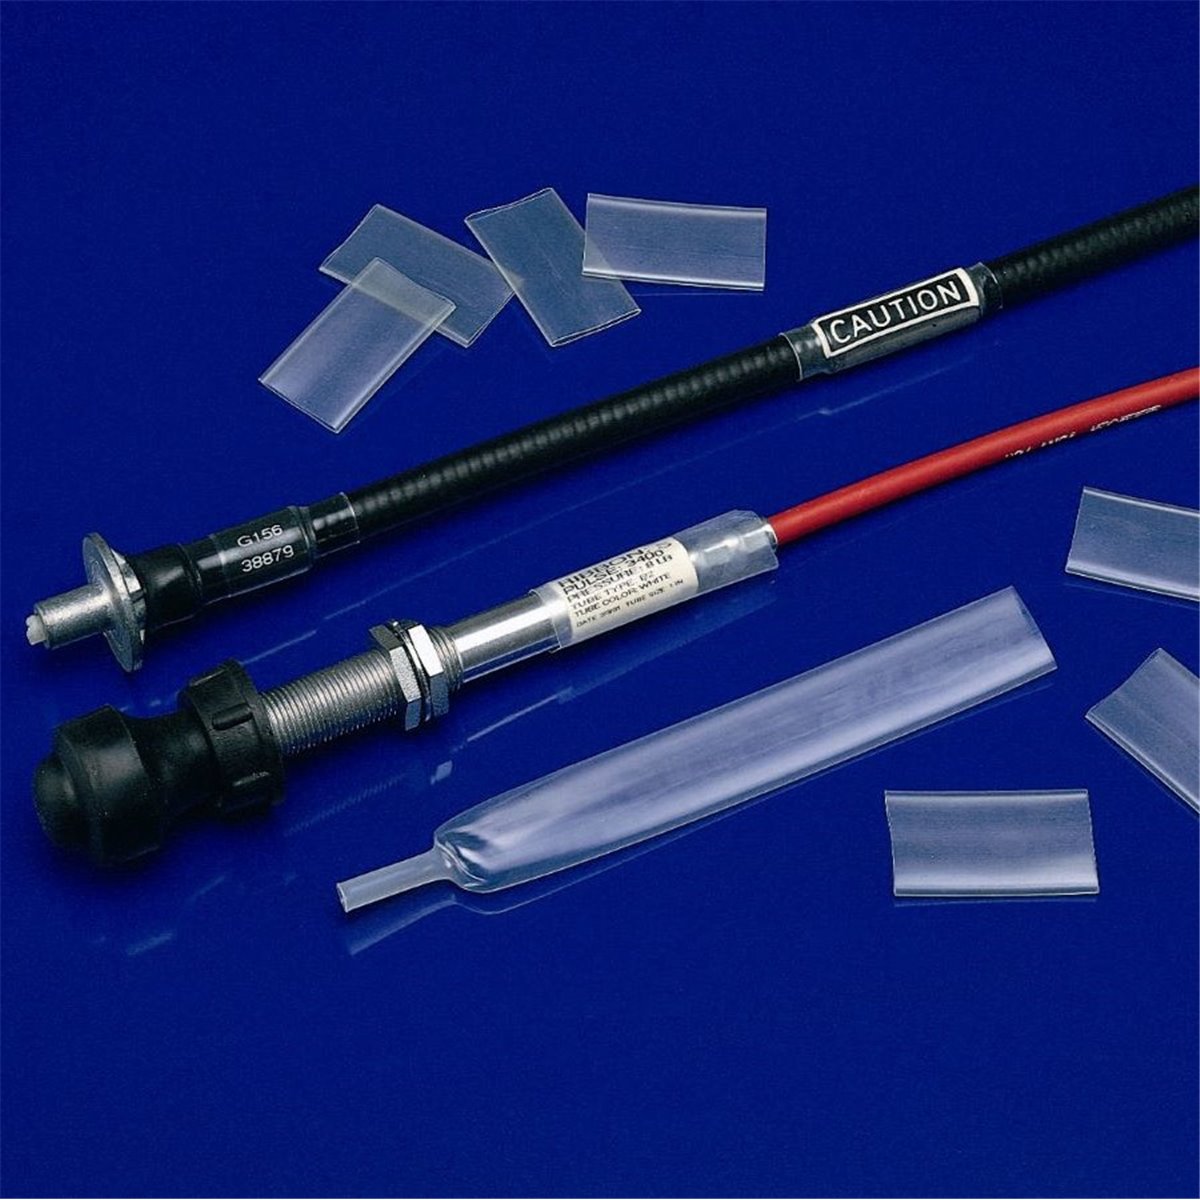 SUMITUBE A2 1/16" (1.6/0.8 mm) transparent heat shrink tubing, 300m from Sumitomo.